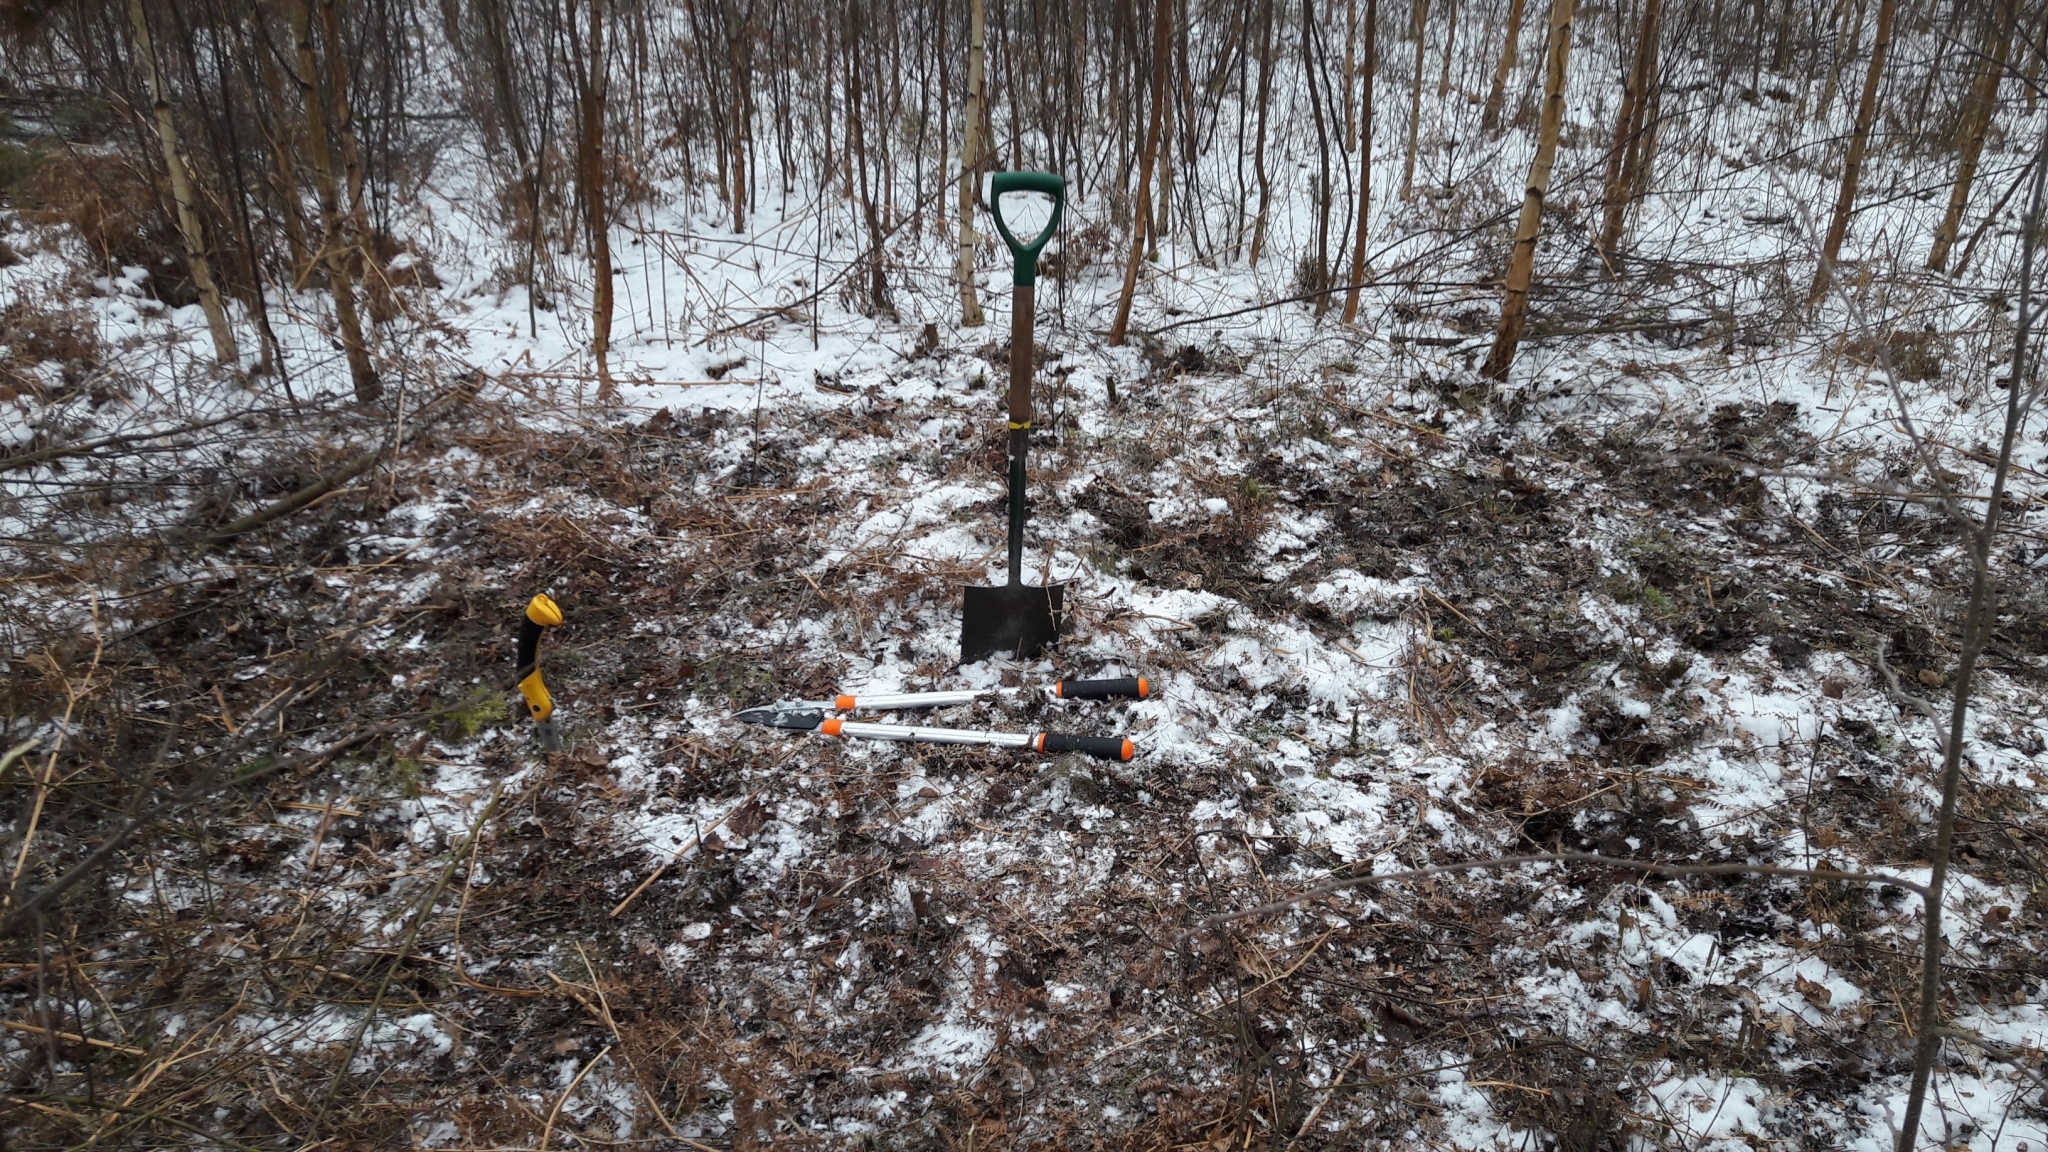 A photo from the FoTF Conservation Event - March 2018 - Birch Coppicing at High Lodge : A spade sunk into the ground stands upright amongst other tools lying on the ground